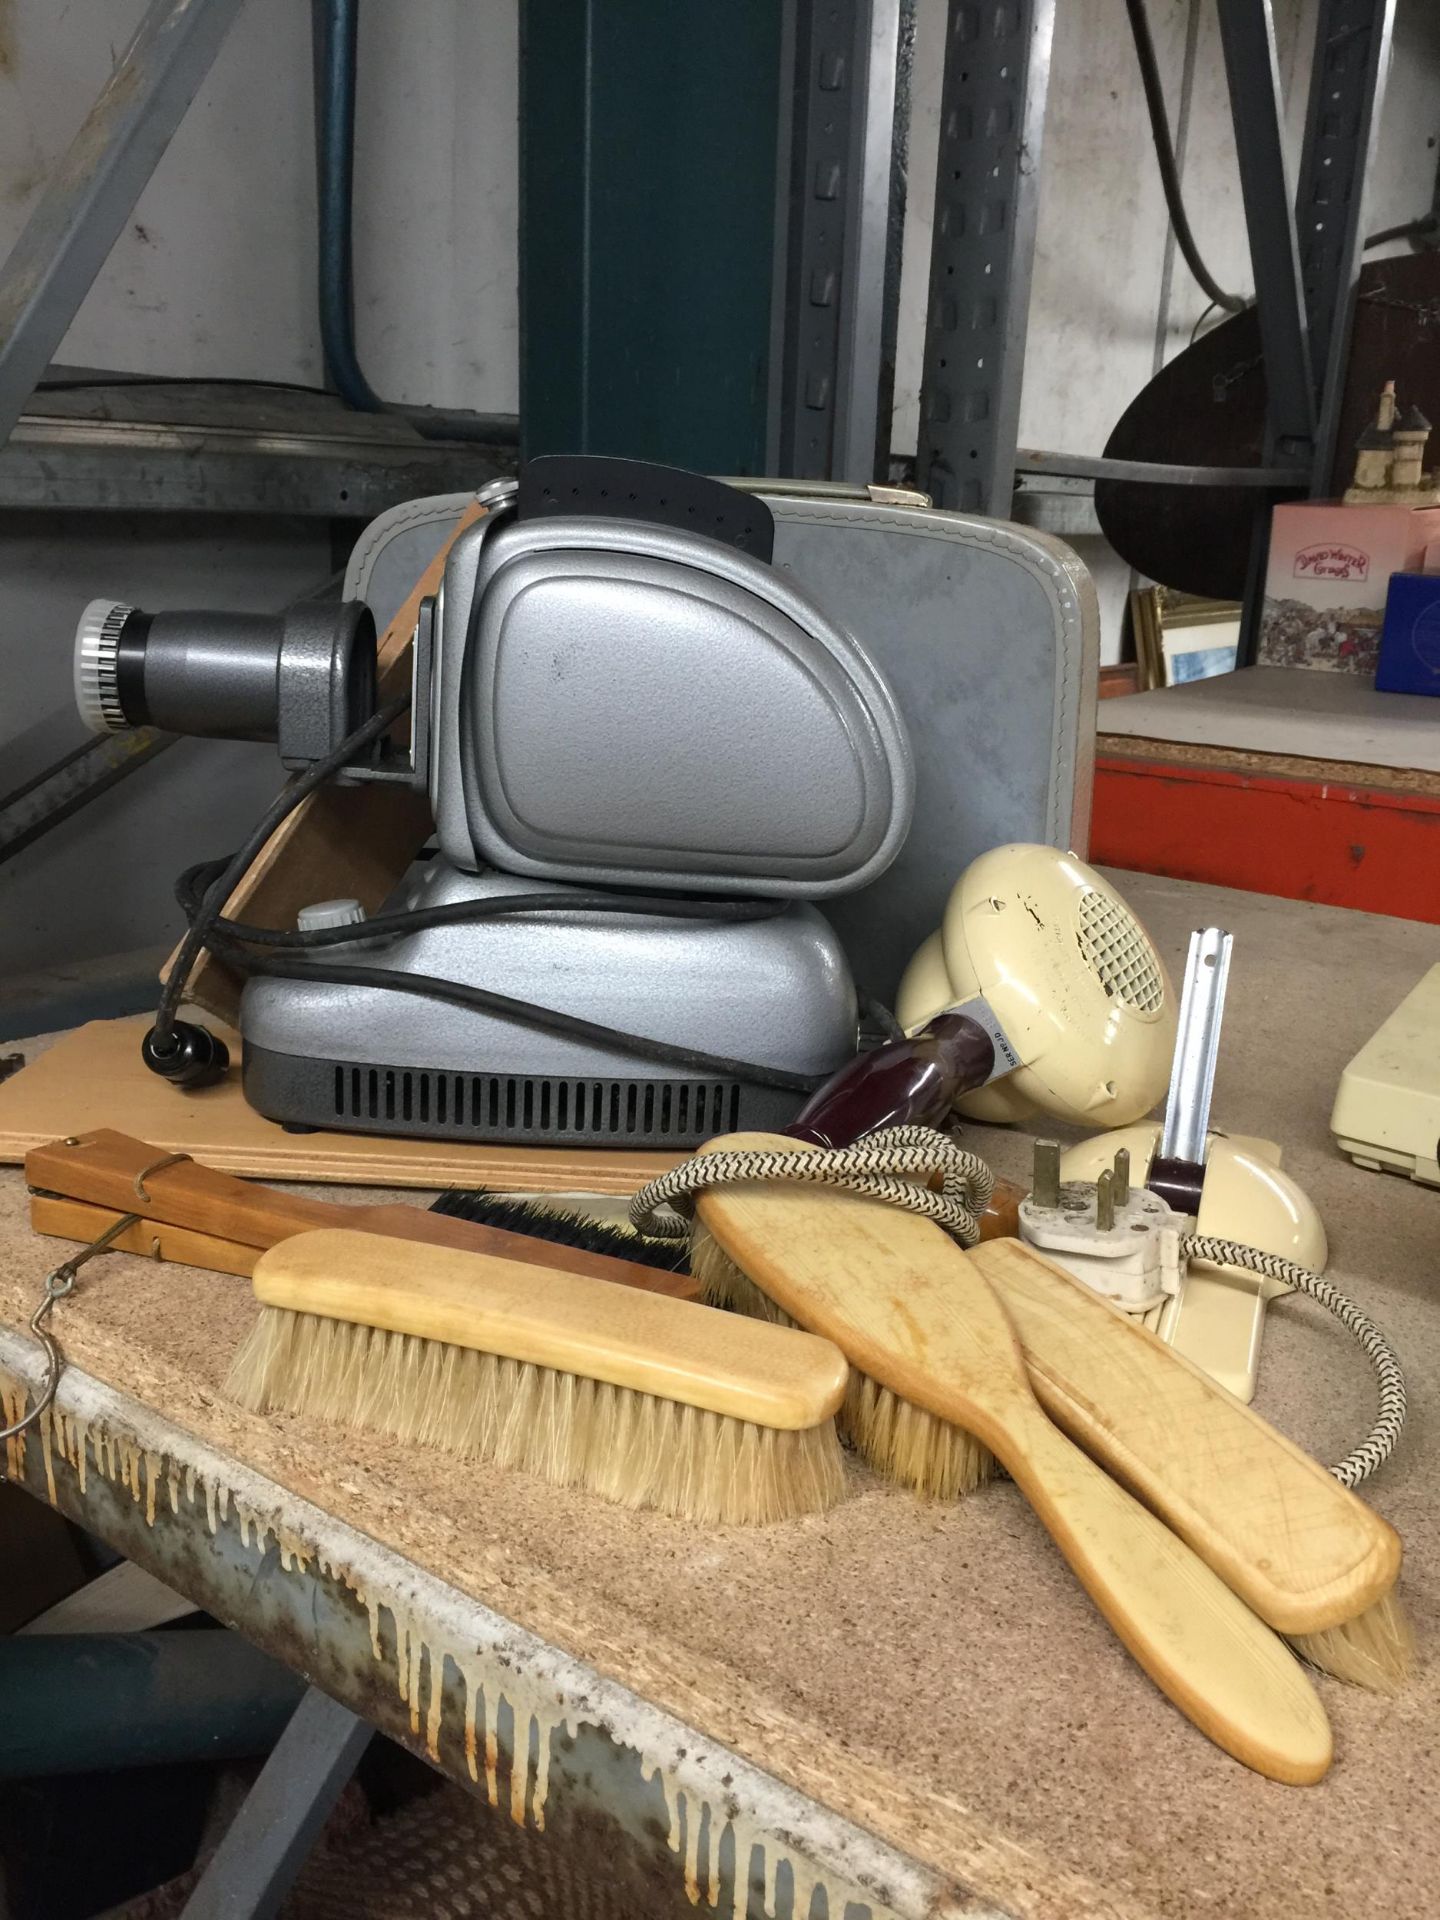 A VINTAGE PLANK PROJECTOR IN CASE, HMV HAIRDRYER AND STAND, BRUSHES, ETC